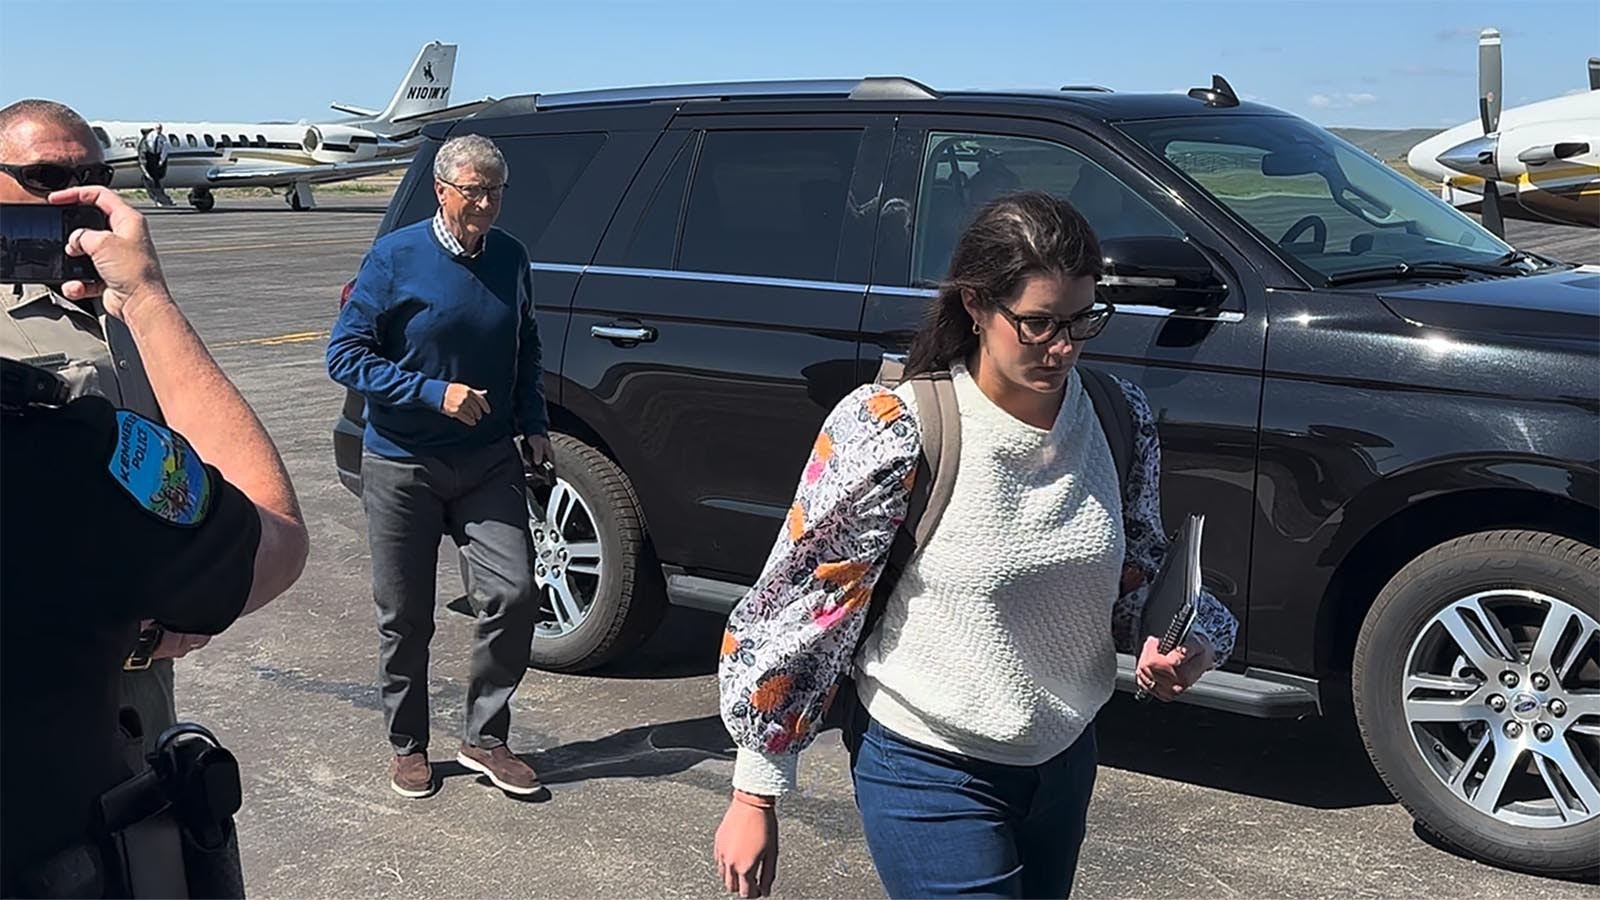 Bill Gates arrives in Kemmerer, Wyoming, on Monday to break ground on the new Natrium nuclear reactor project for TerraPower.